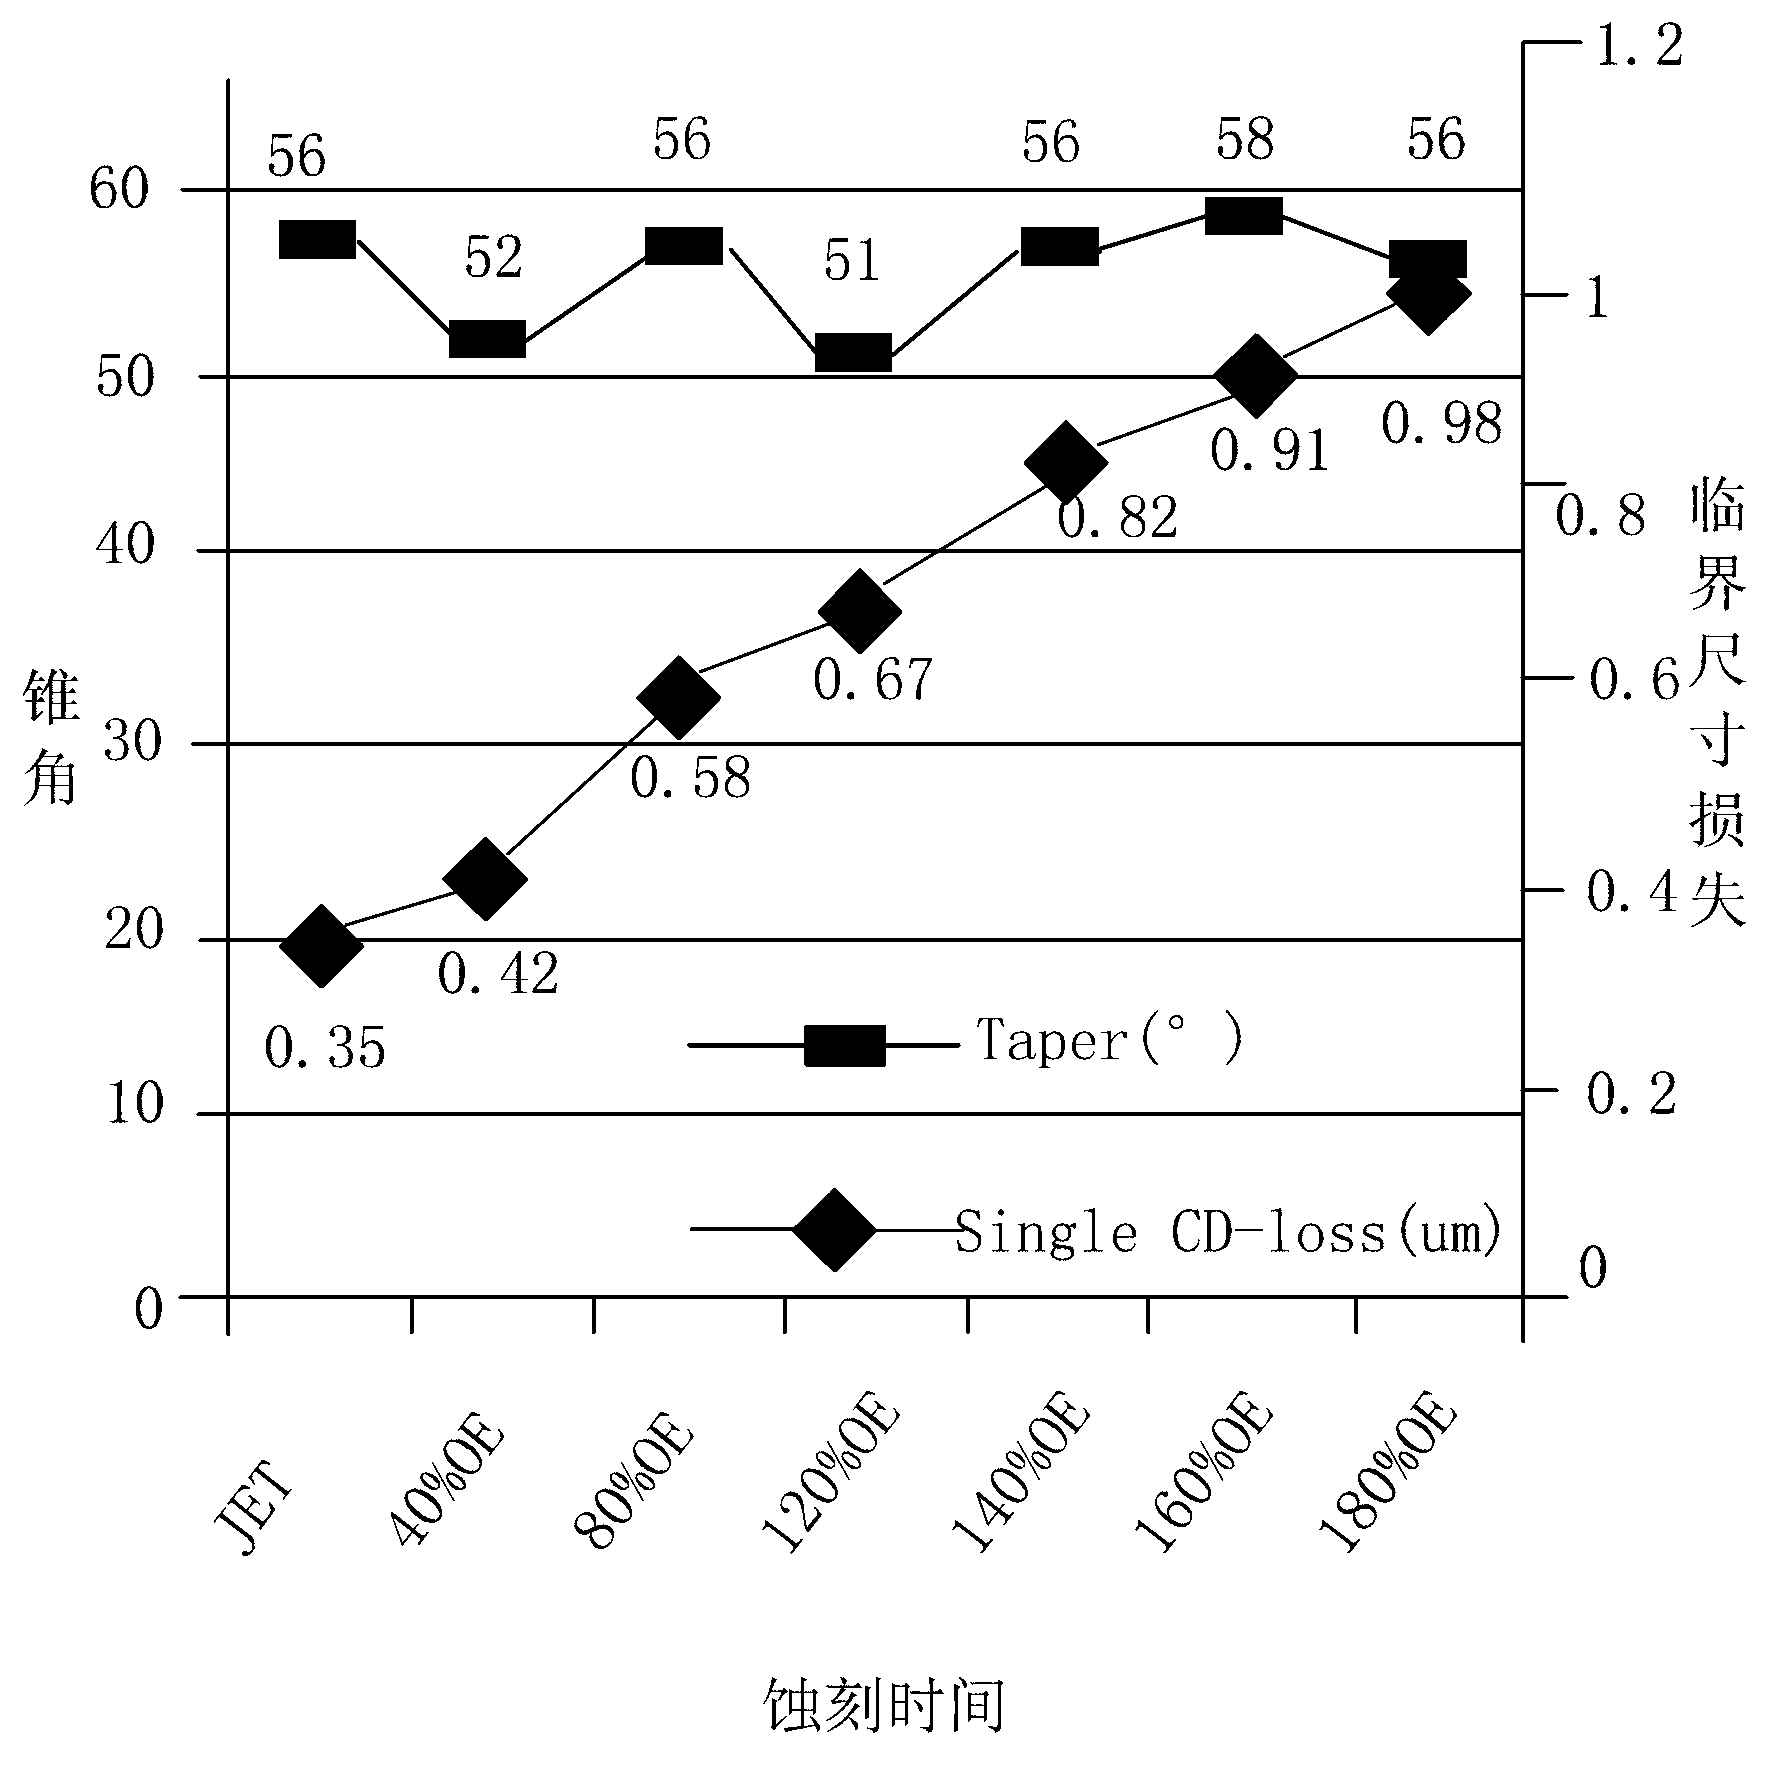 Etching liquid for TFT (thin film transistor)array substrate copper conductor